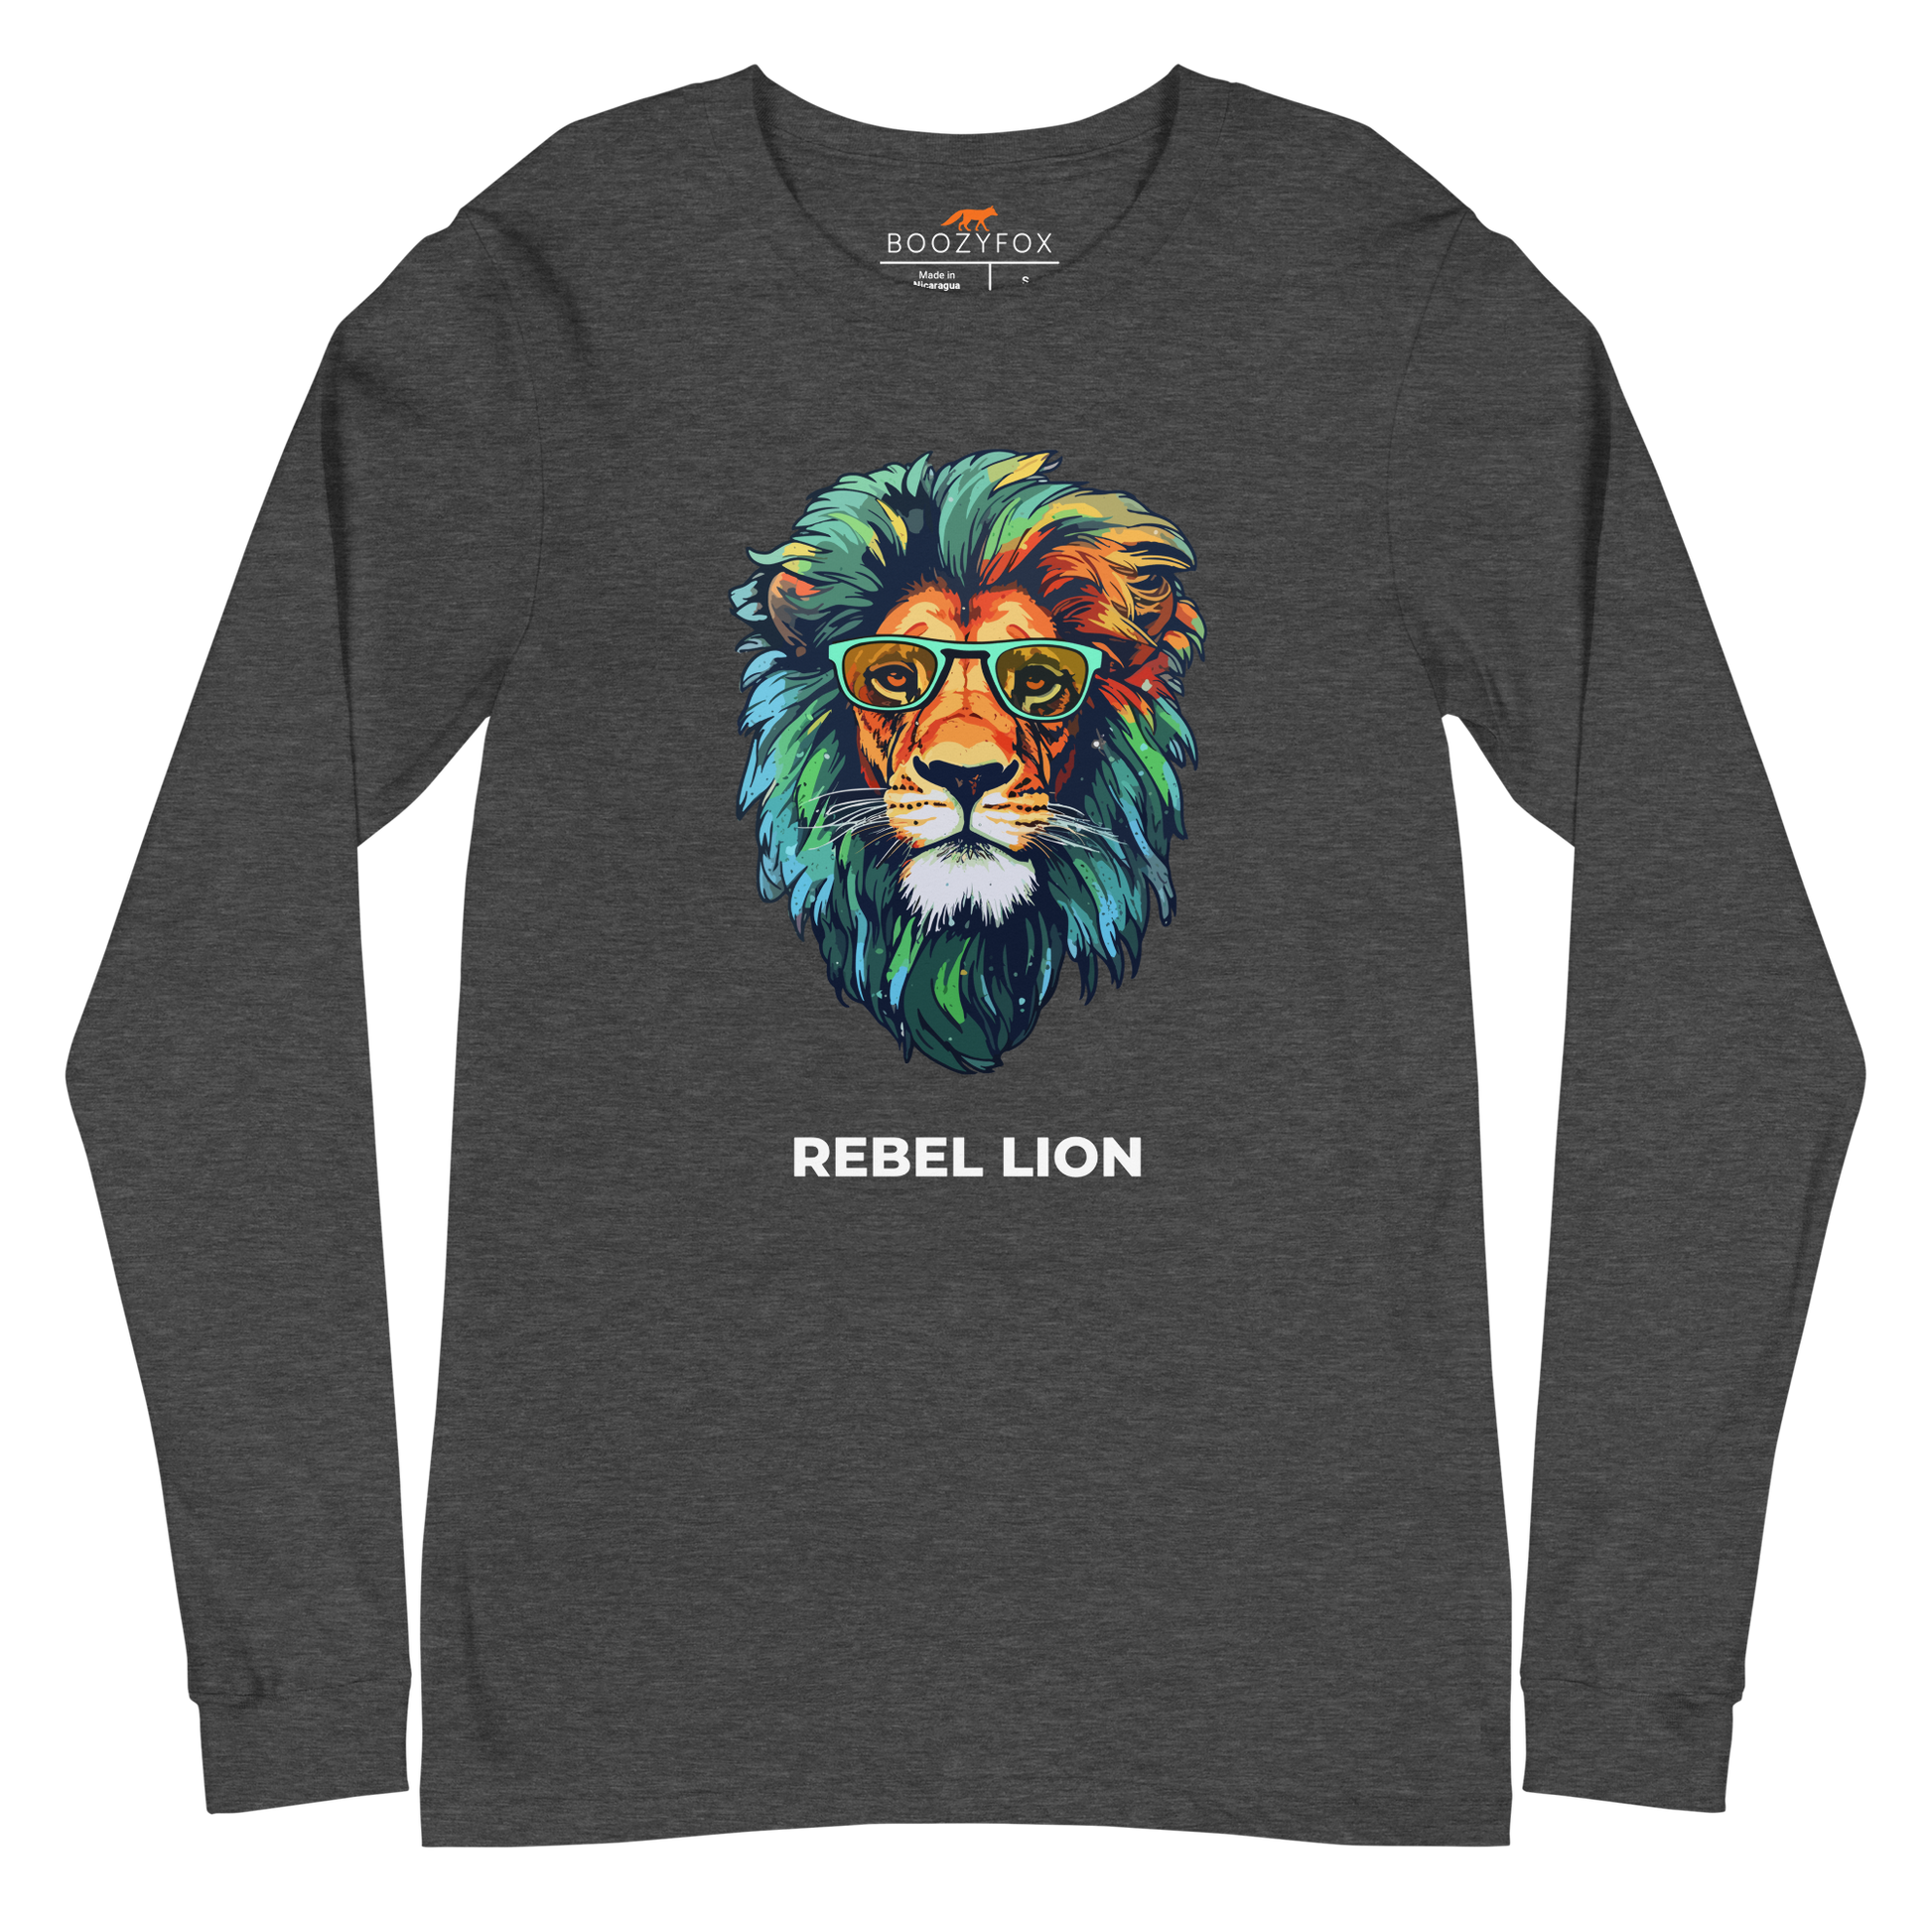 Dark Grey Heather Lion Long Sleeve Tee featuring a bold Rebel Lion graphic on the chest - Cool Lion Long Sleeve Graphic Tees - Boozy Fox